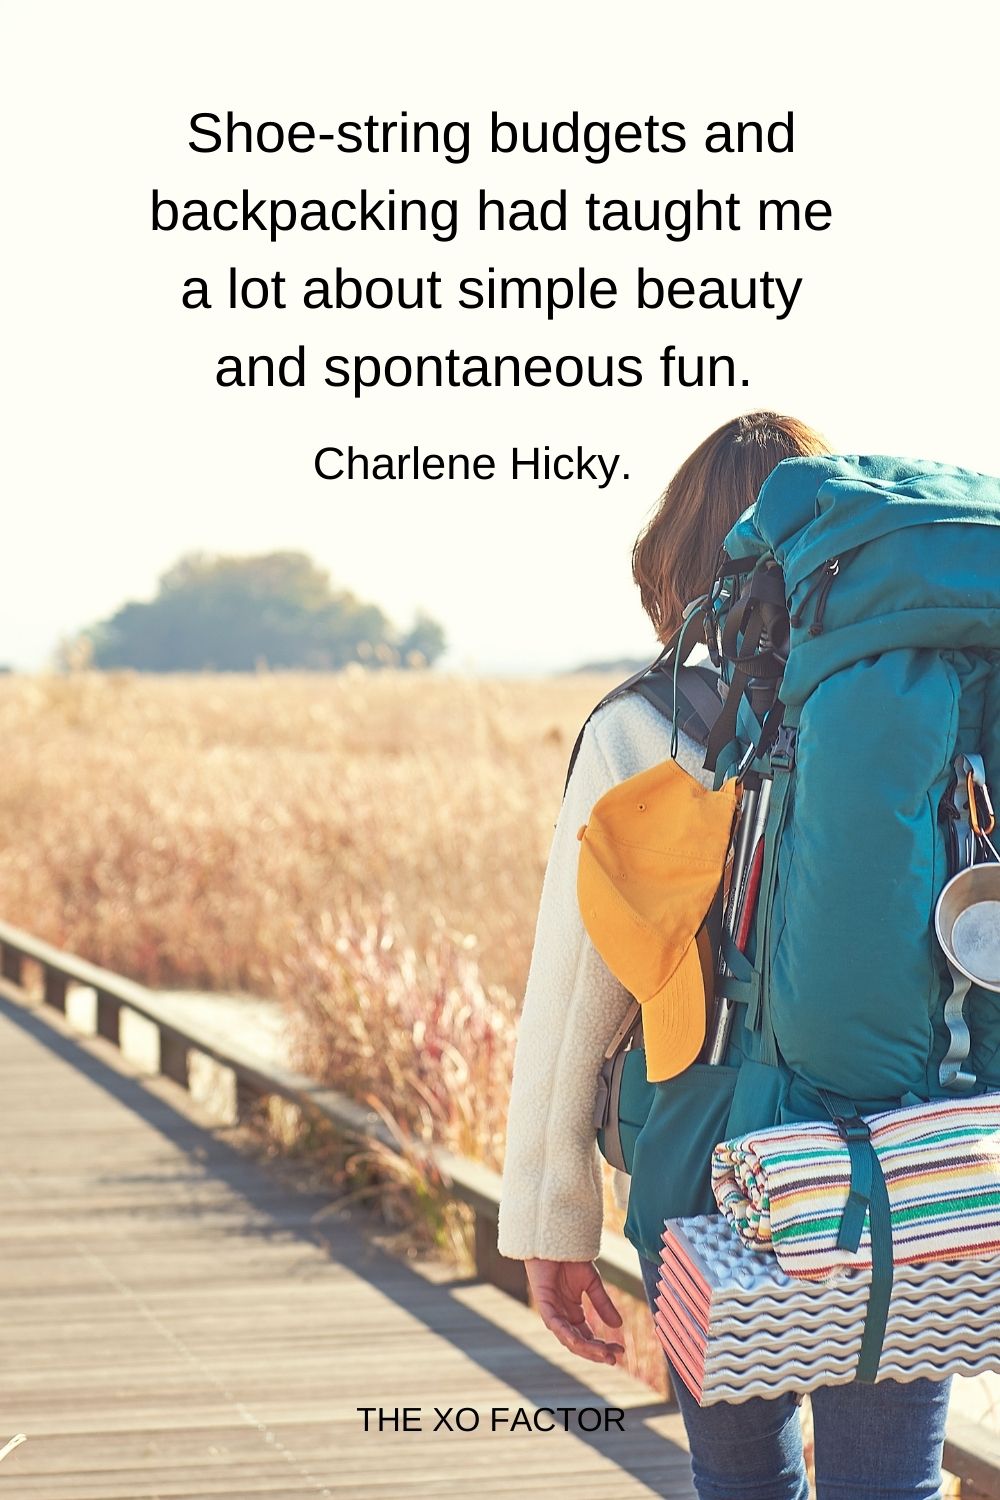 Shoe-string budgets and backpacking had taught me a lot about simple beauty and spontaneous fun.  Charlene Hicky.